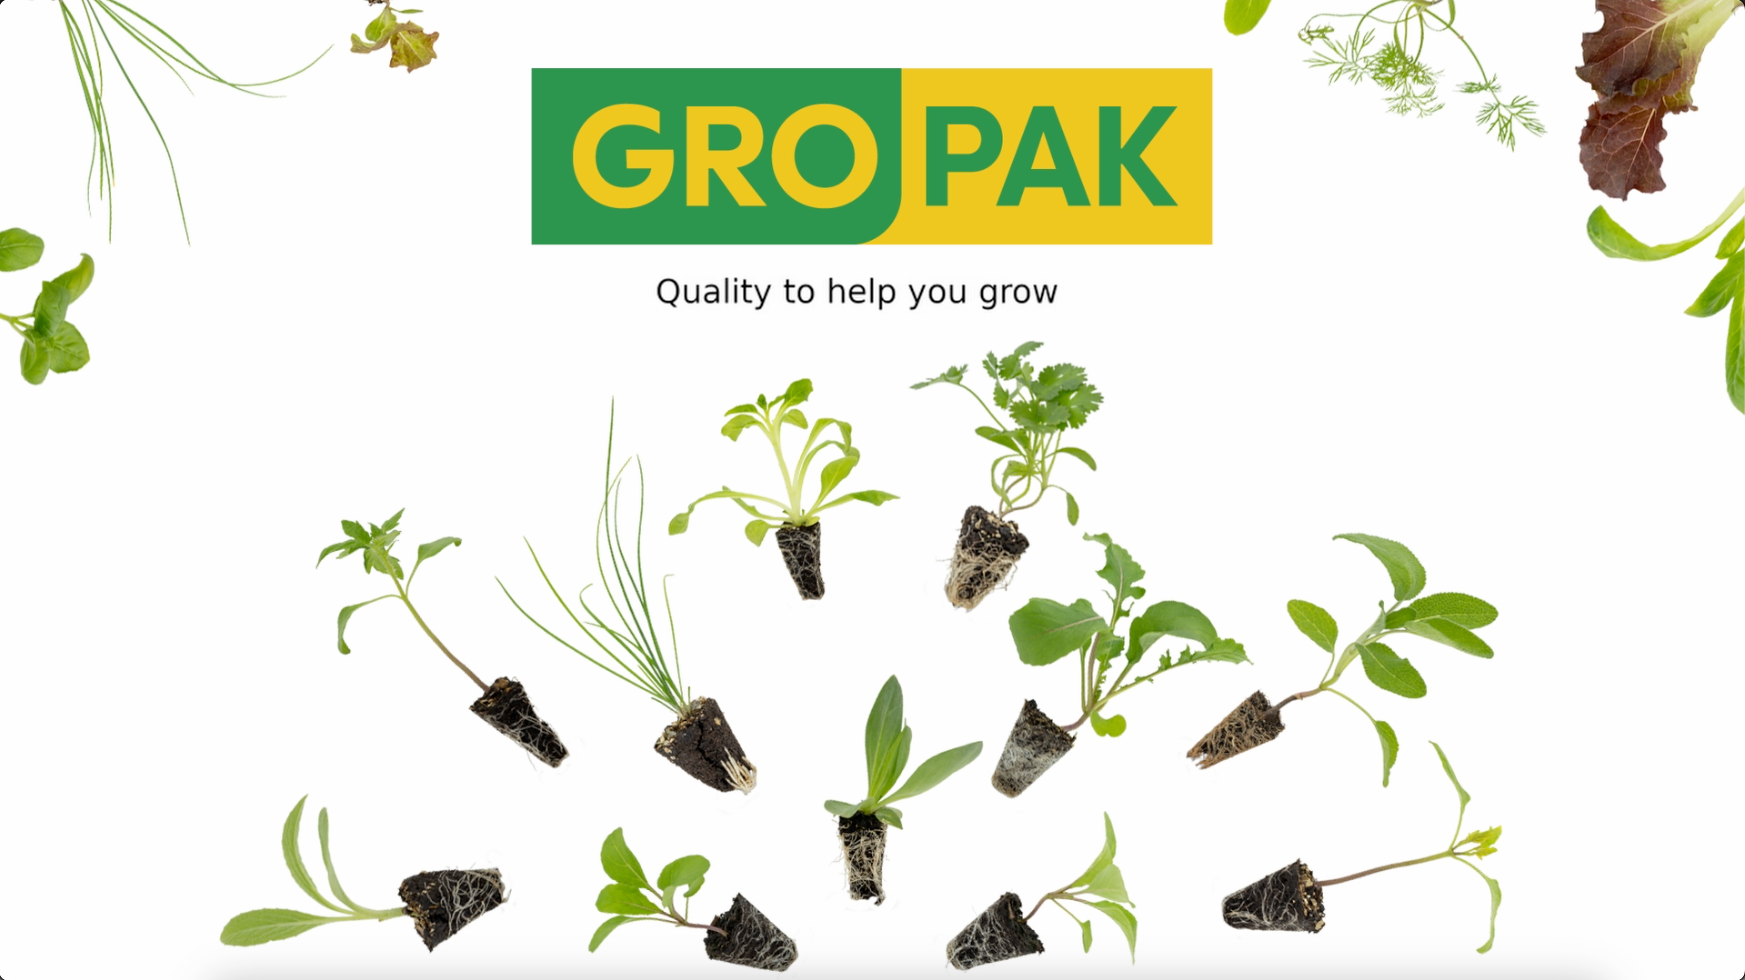 Load video: How to transplant your plug seedlings from GroPak